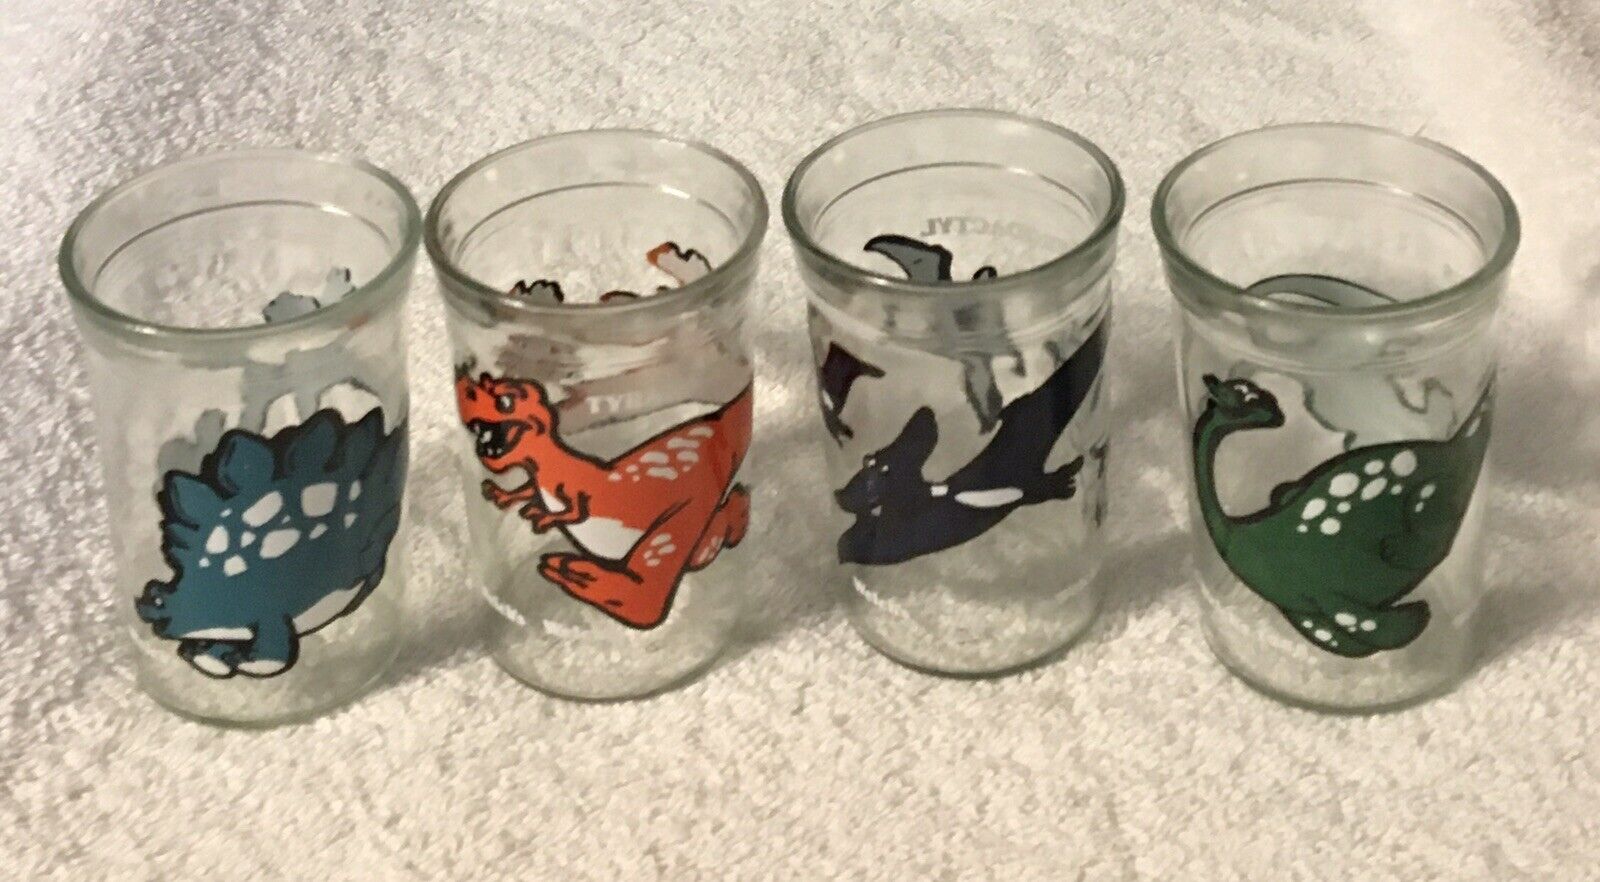 Vintage Complete Set of 4 WELCH'S Dinosaur Jelly Jam Glass Anchor Hocking